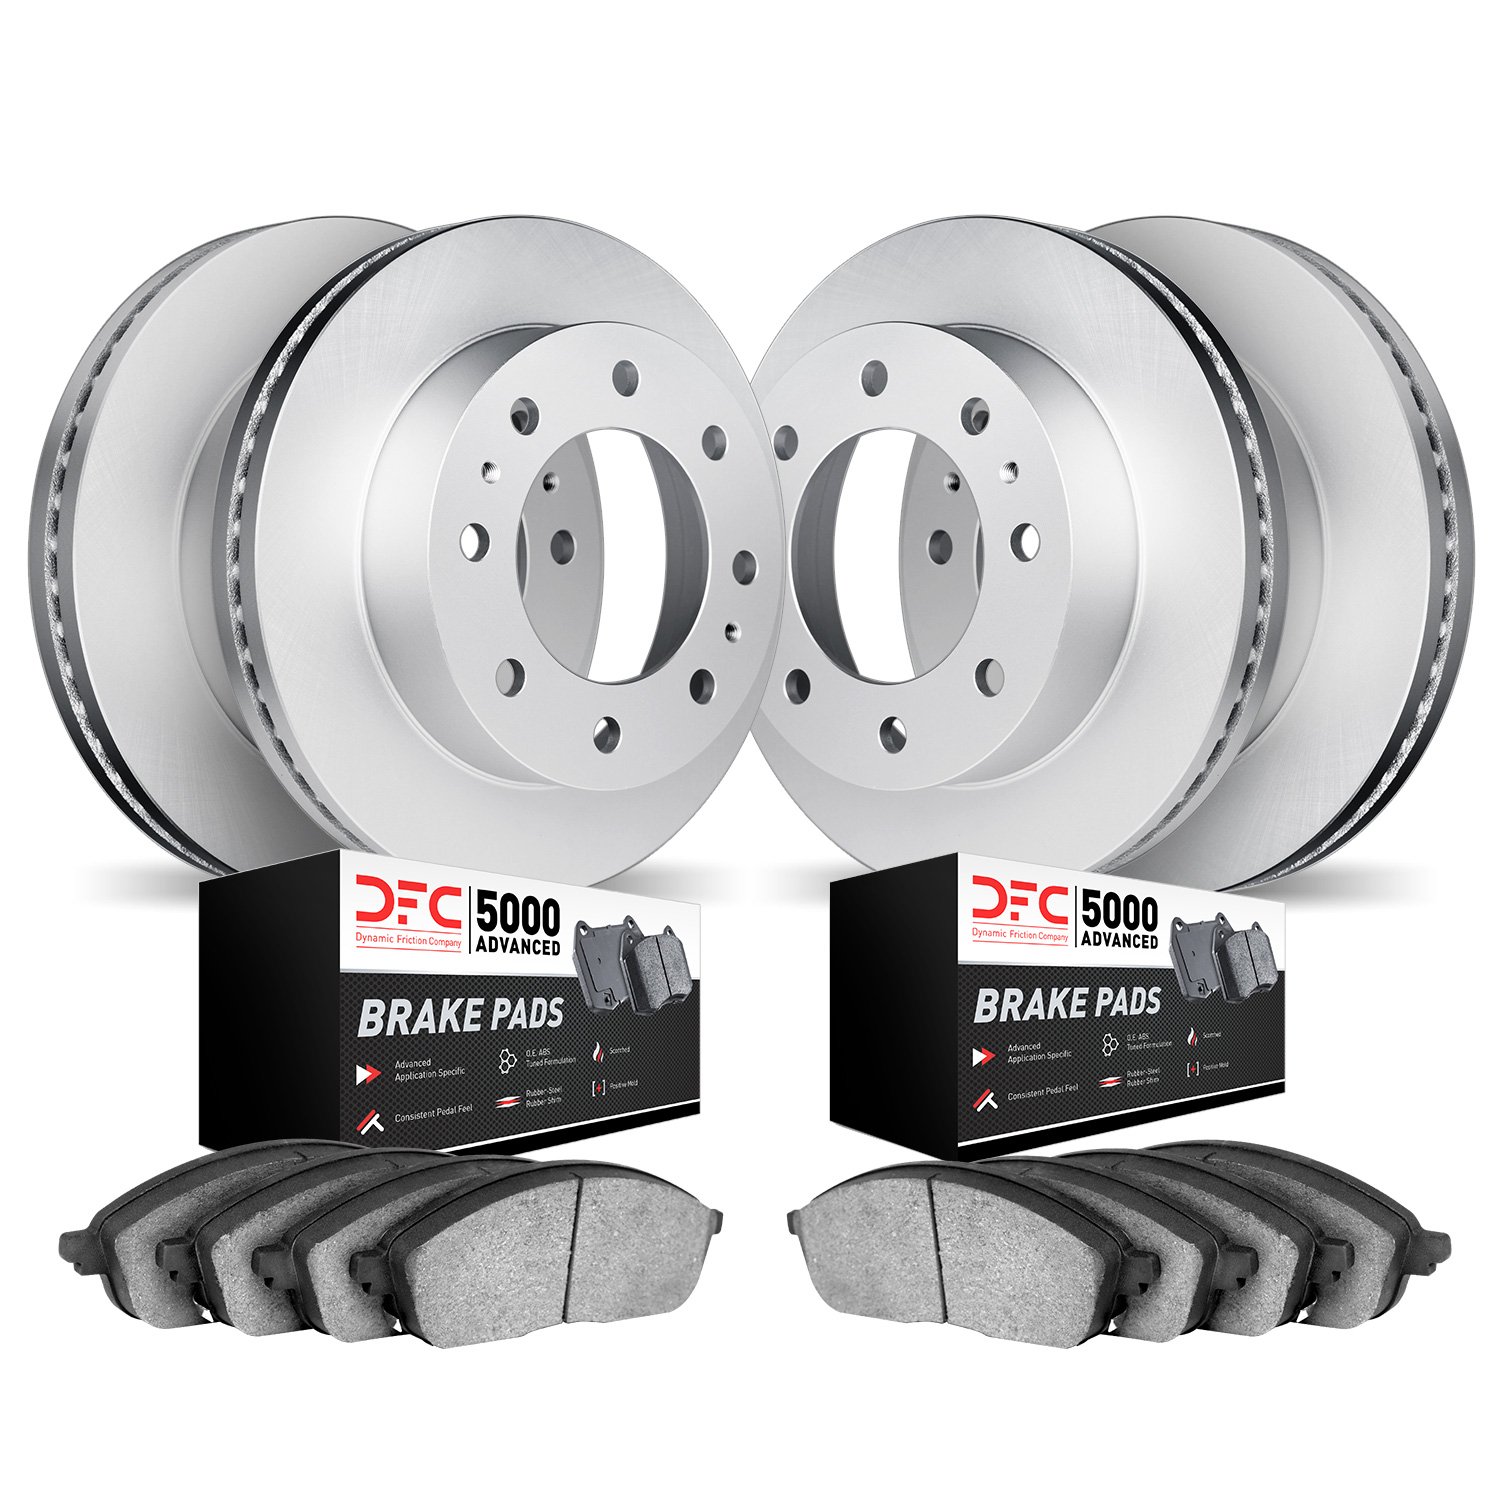 4504-54273 Geospec Brake Rotors w/5000 Advanced Brake Pads Kit, 2005-2007 Ford/Lincoln/Mercury/Mazda, Position: Front and Rear